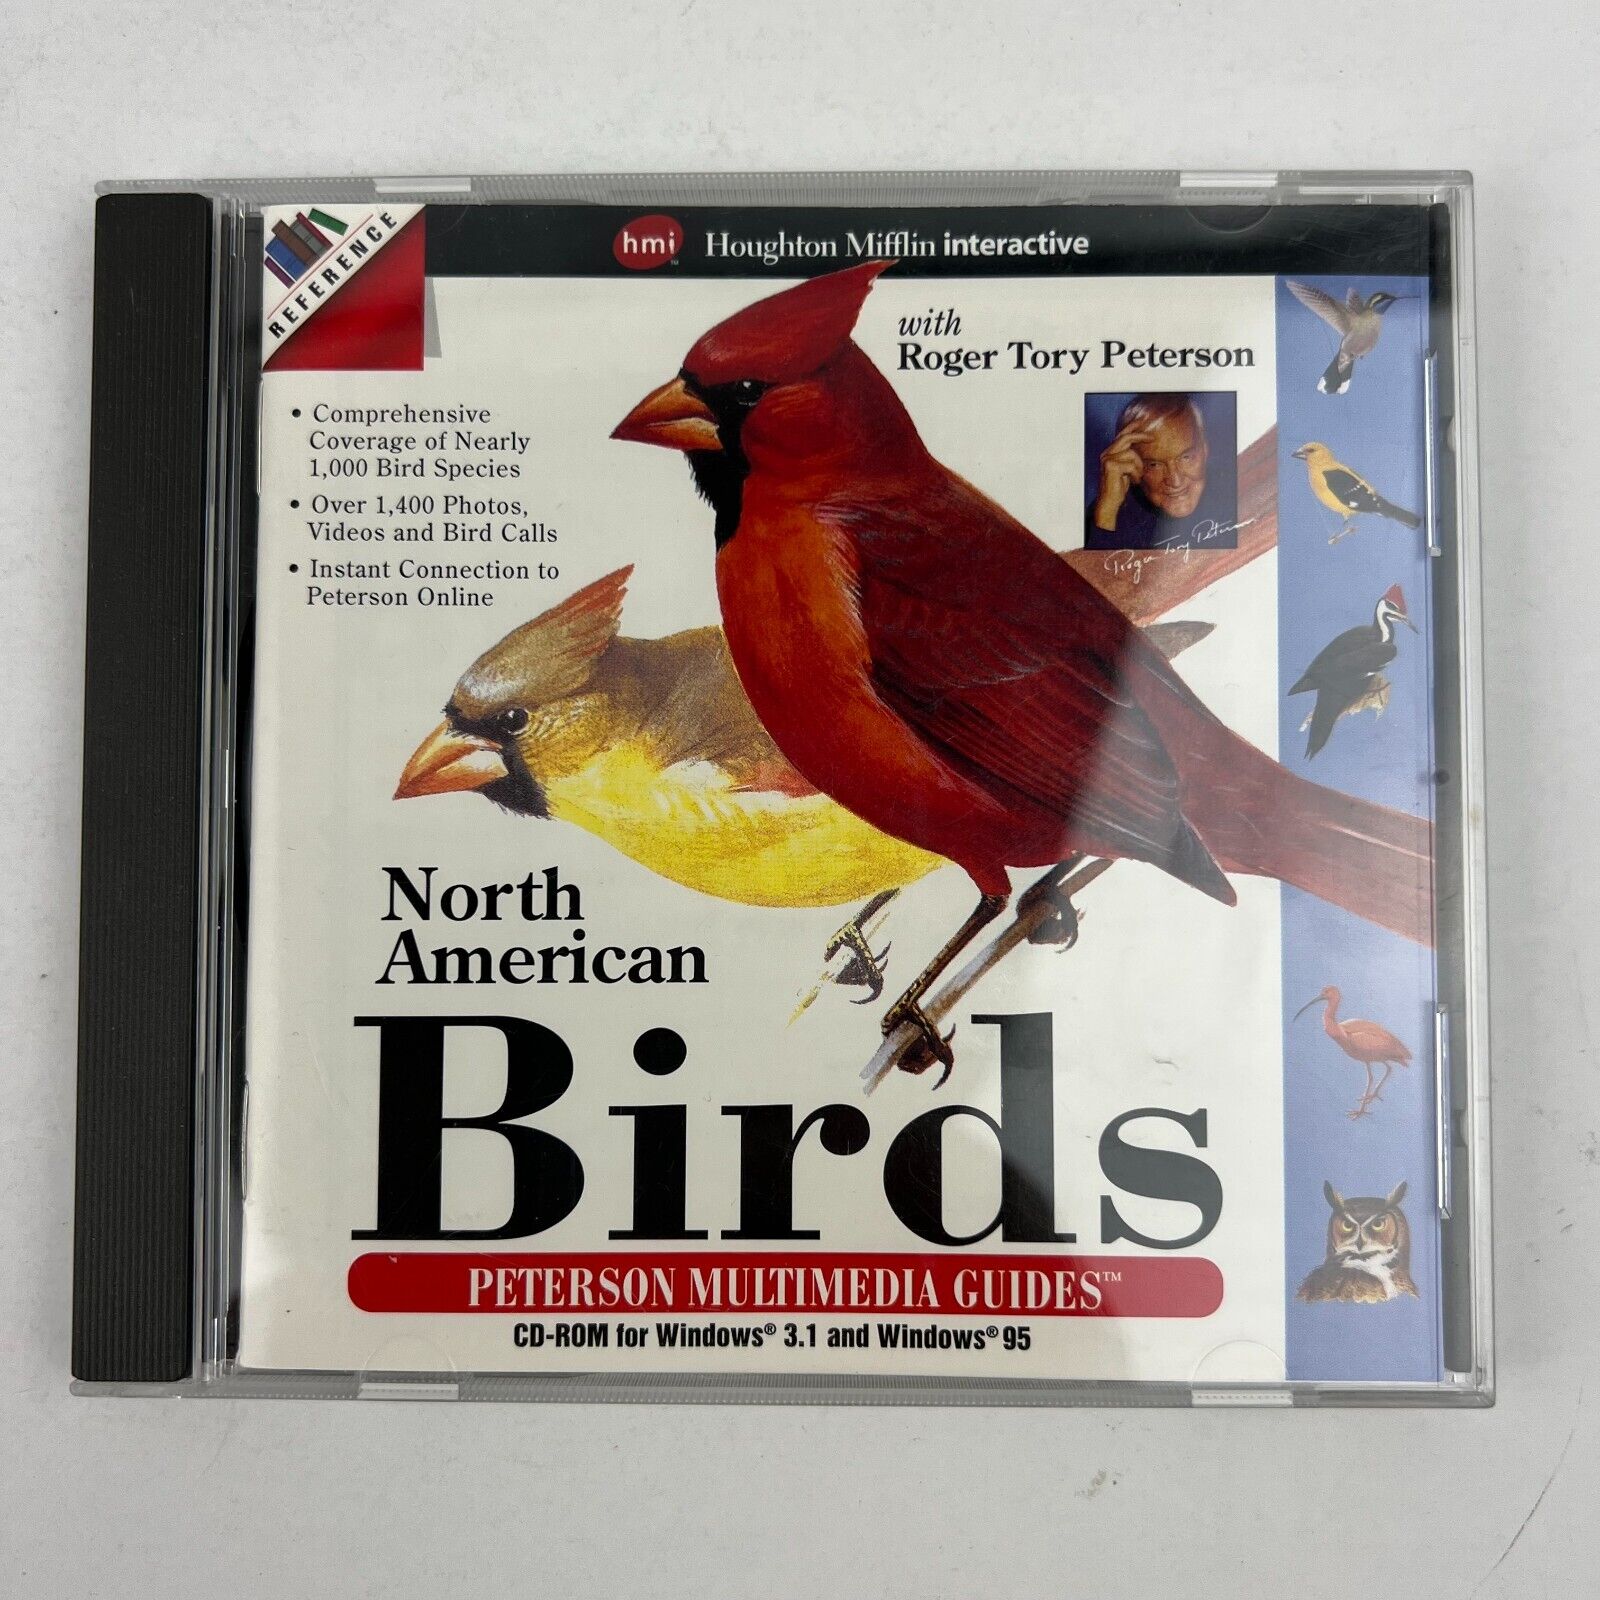 North American Birds Peterson Multimedia Guides PC CD-Rom